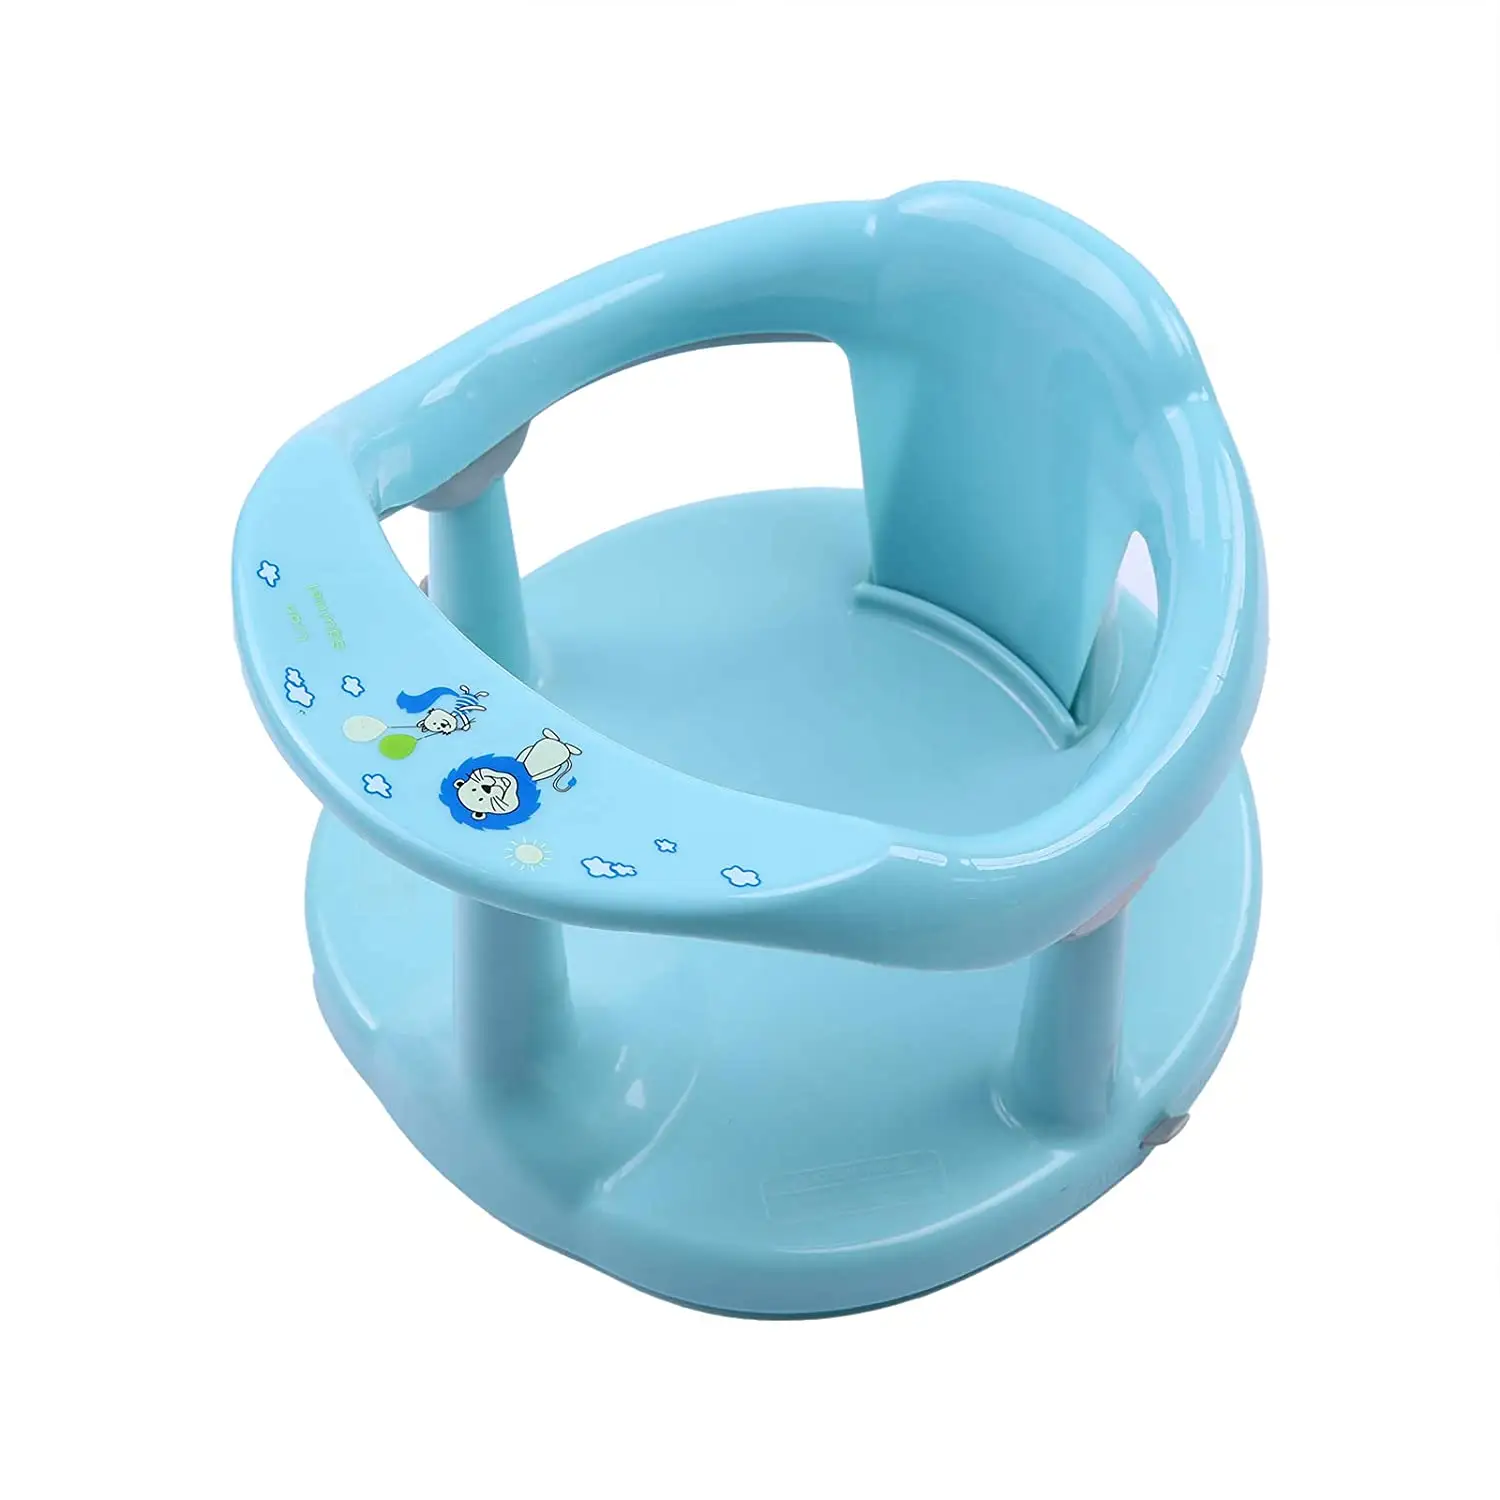 Baby Bath Seat for Baby 6-18 Months ,Plastic Infant Bath Seat for Sitting Up in Tub,Anti-Slip Round Edge Safe Support Seat